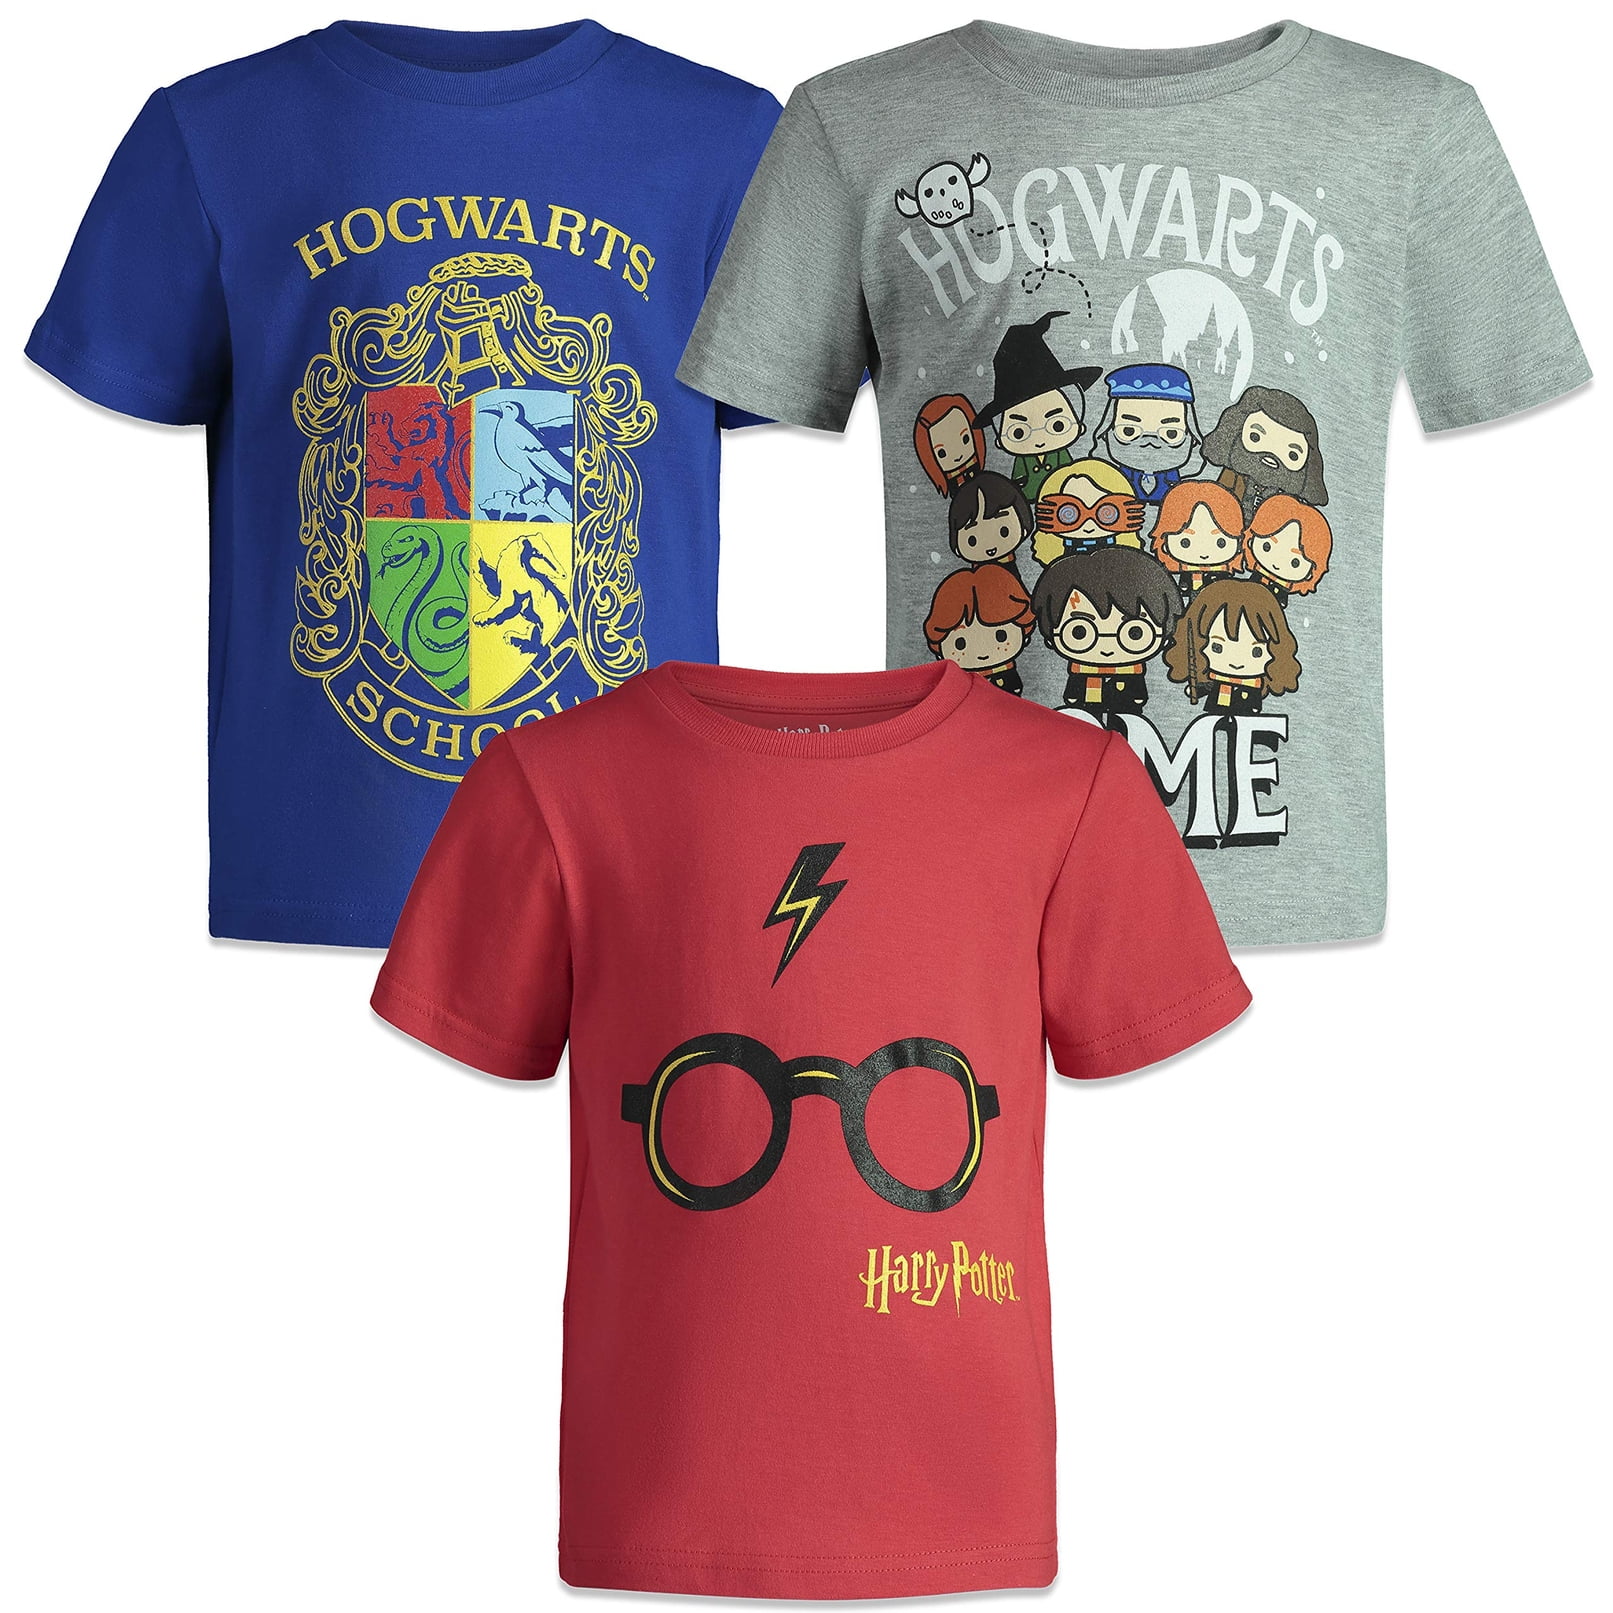 Clothing Unisex Kids Clothing Tops & Tees T-shirts Graphic Tees 2000 HARRY POTTER Golden Snitch Vintage T Shirt // Youth Large can also fit adult Small 